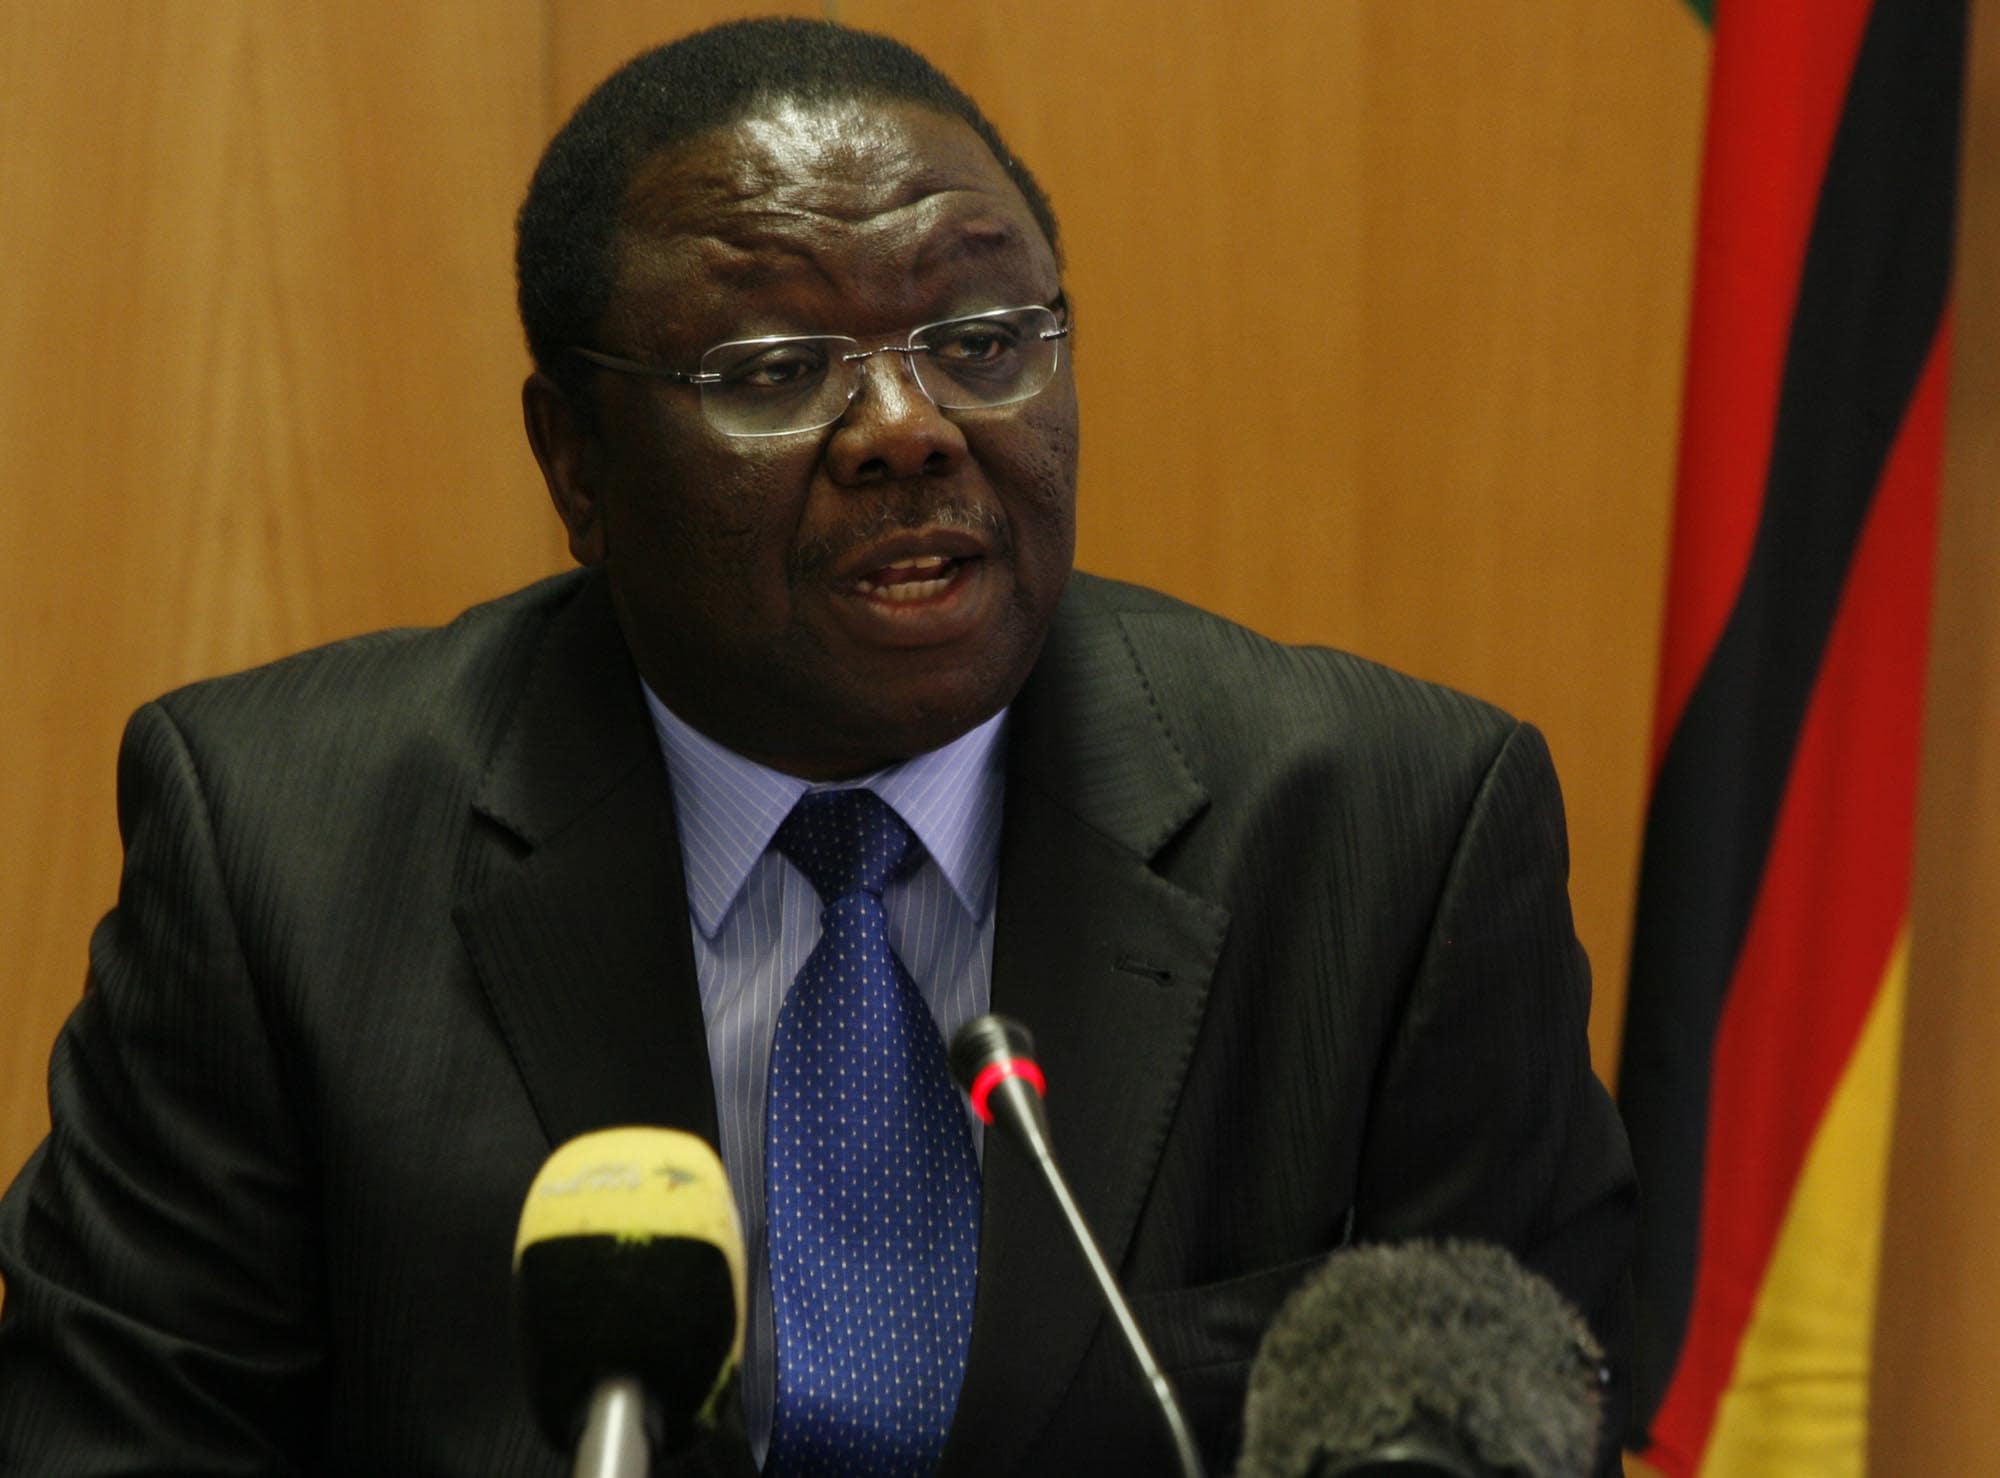 The Prime Minister of Zimbabwe and leader of the Movement for Democratic Change, Morgan Tsvangirai, addresses the press in Harare, 20 May 2009. Supporters of the MDC have recently attacked journalists., Zimbo Zimbo/Demotix